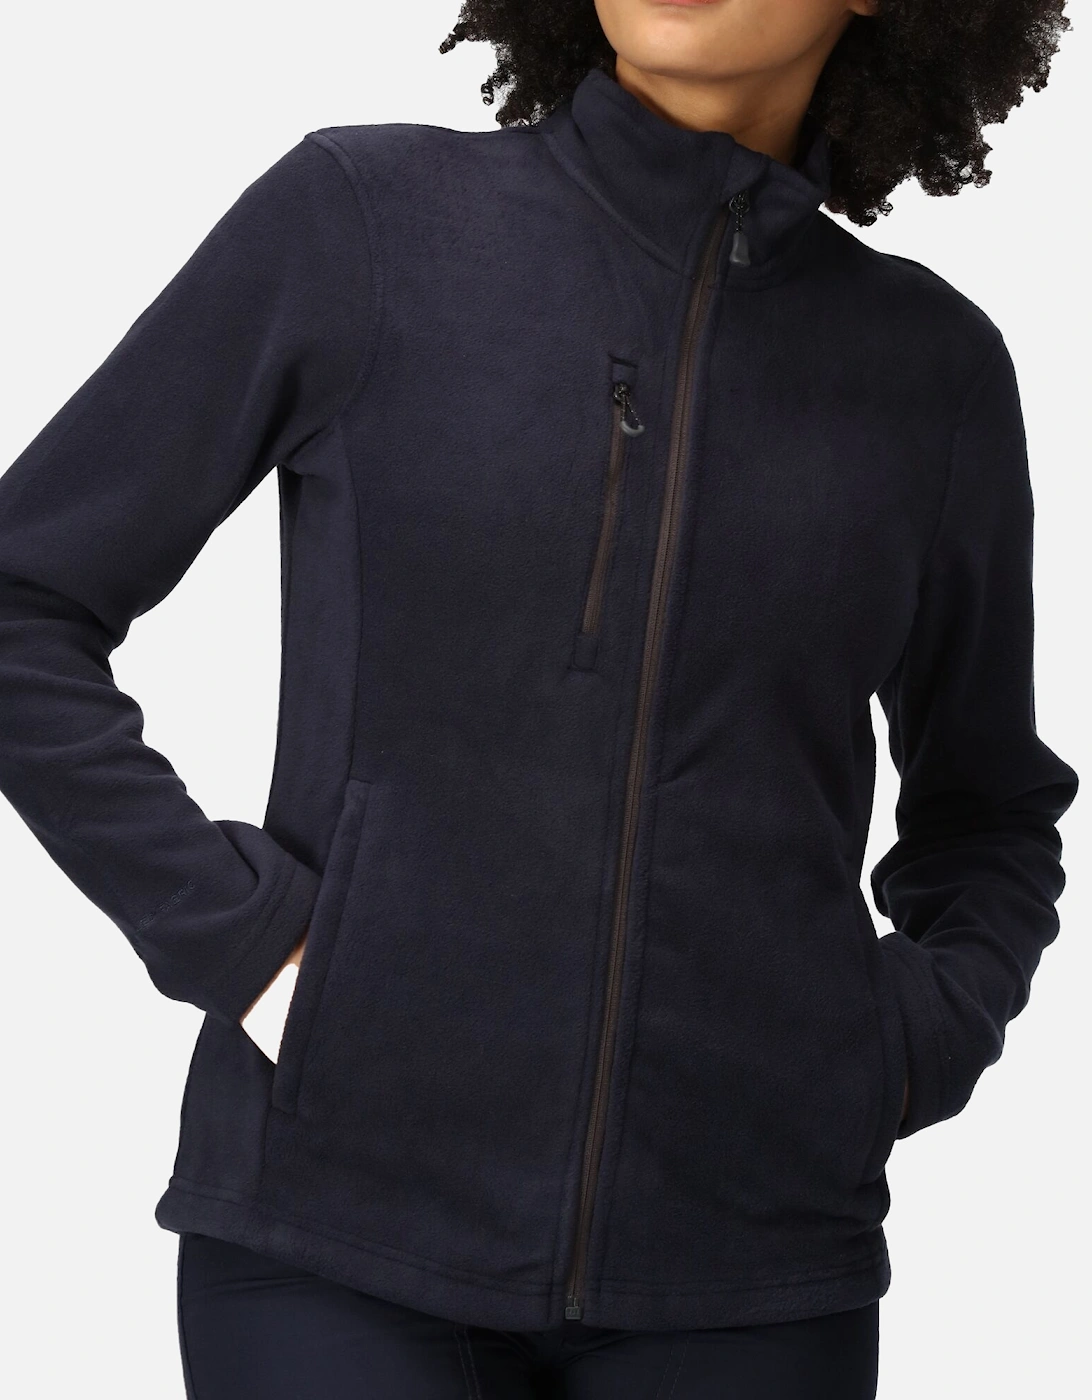 Womens/Ladies Honestly Made Recycled Fleece Jacket